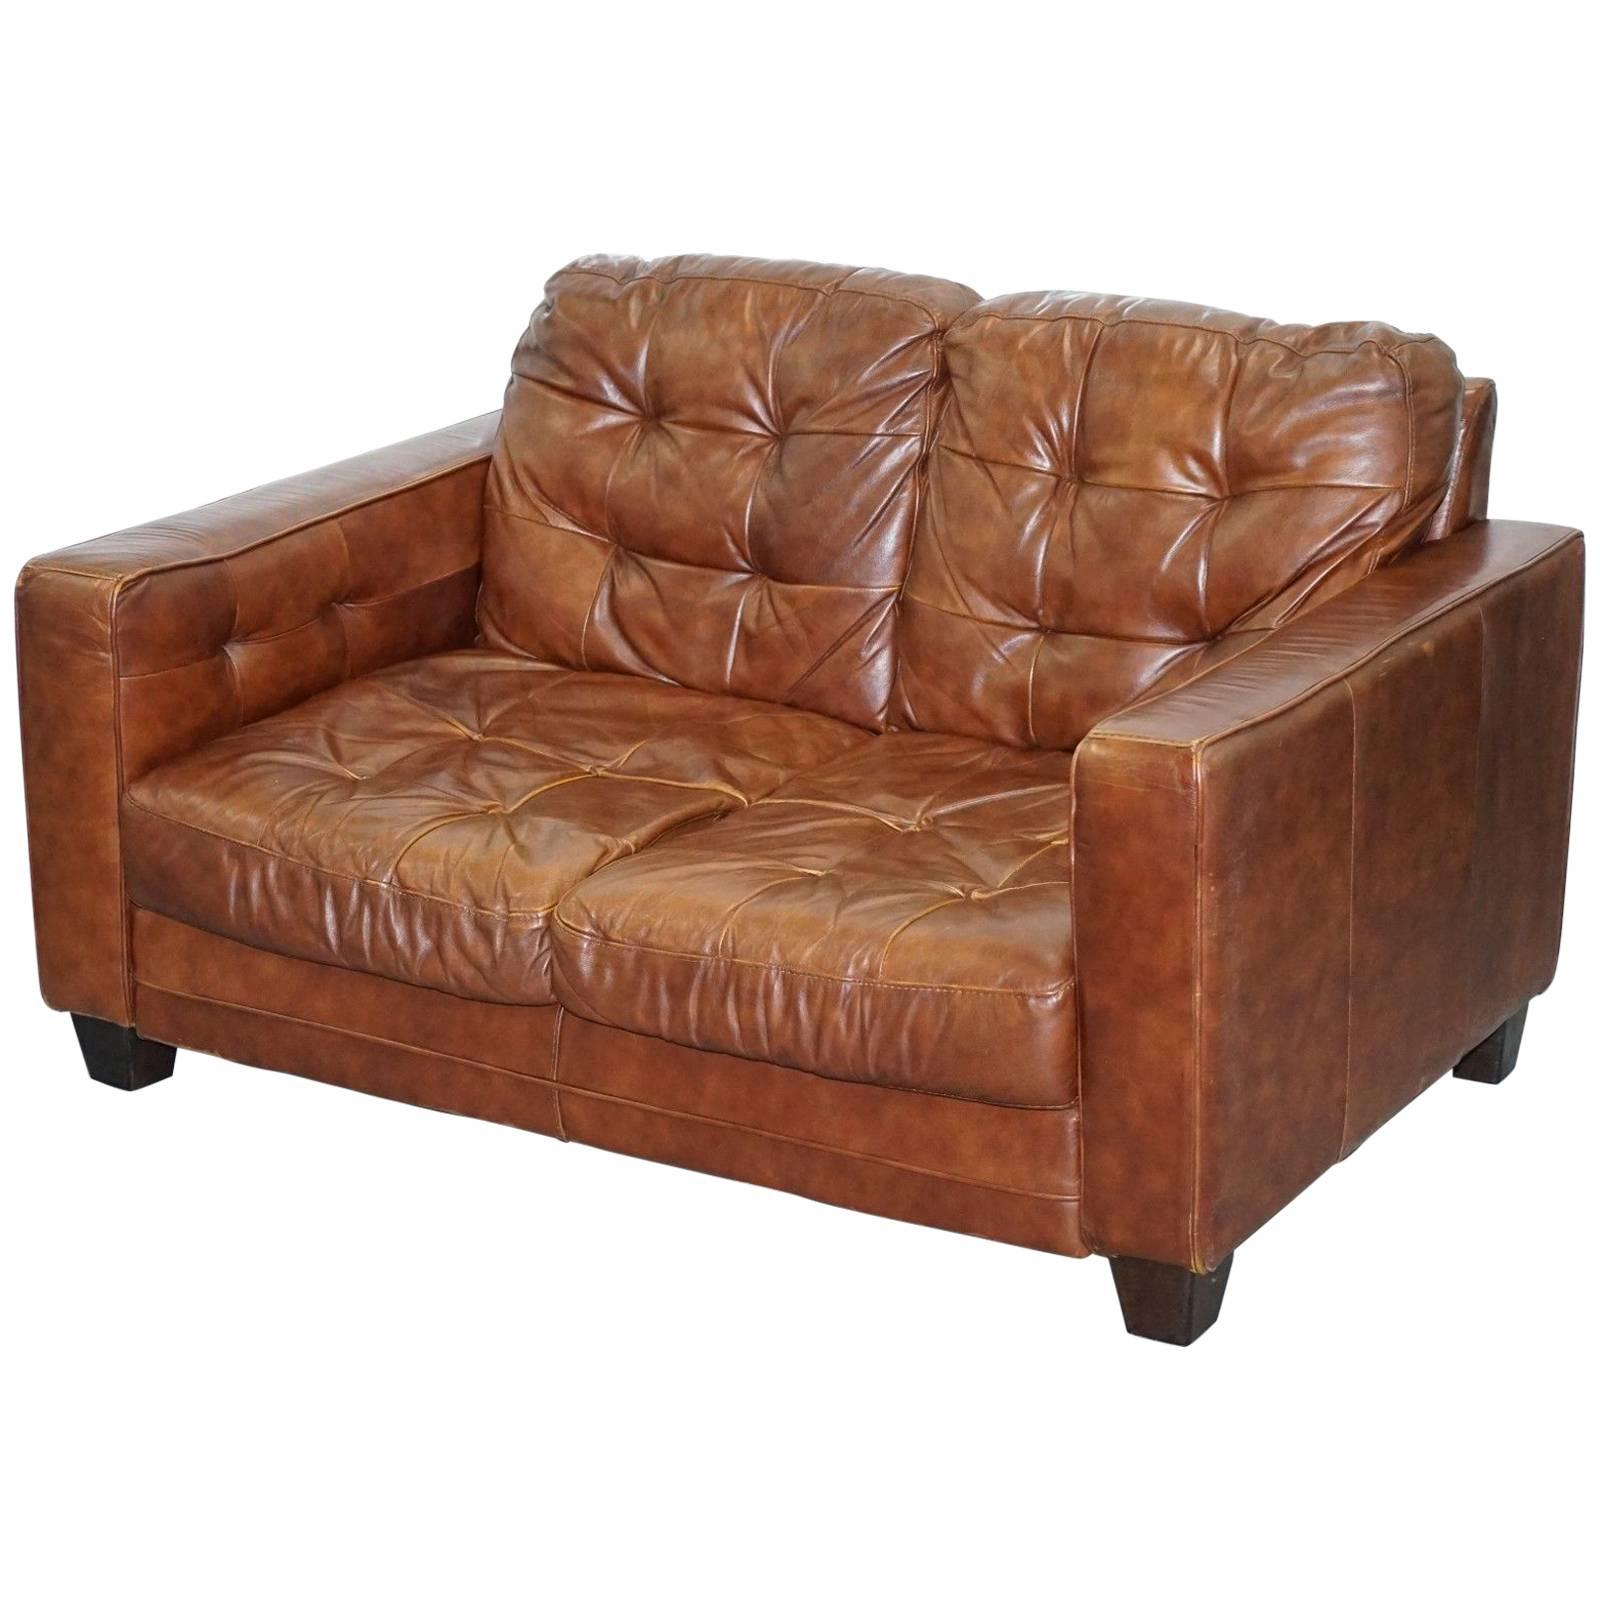 Knoll Style Aged Brown Leather Sofa Chesterfield Style Buttoning Two-Seat Sofa